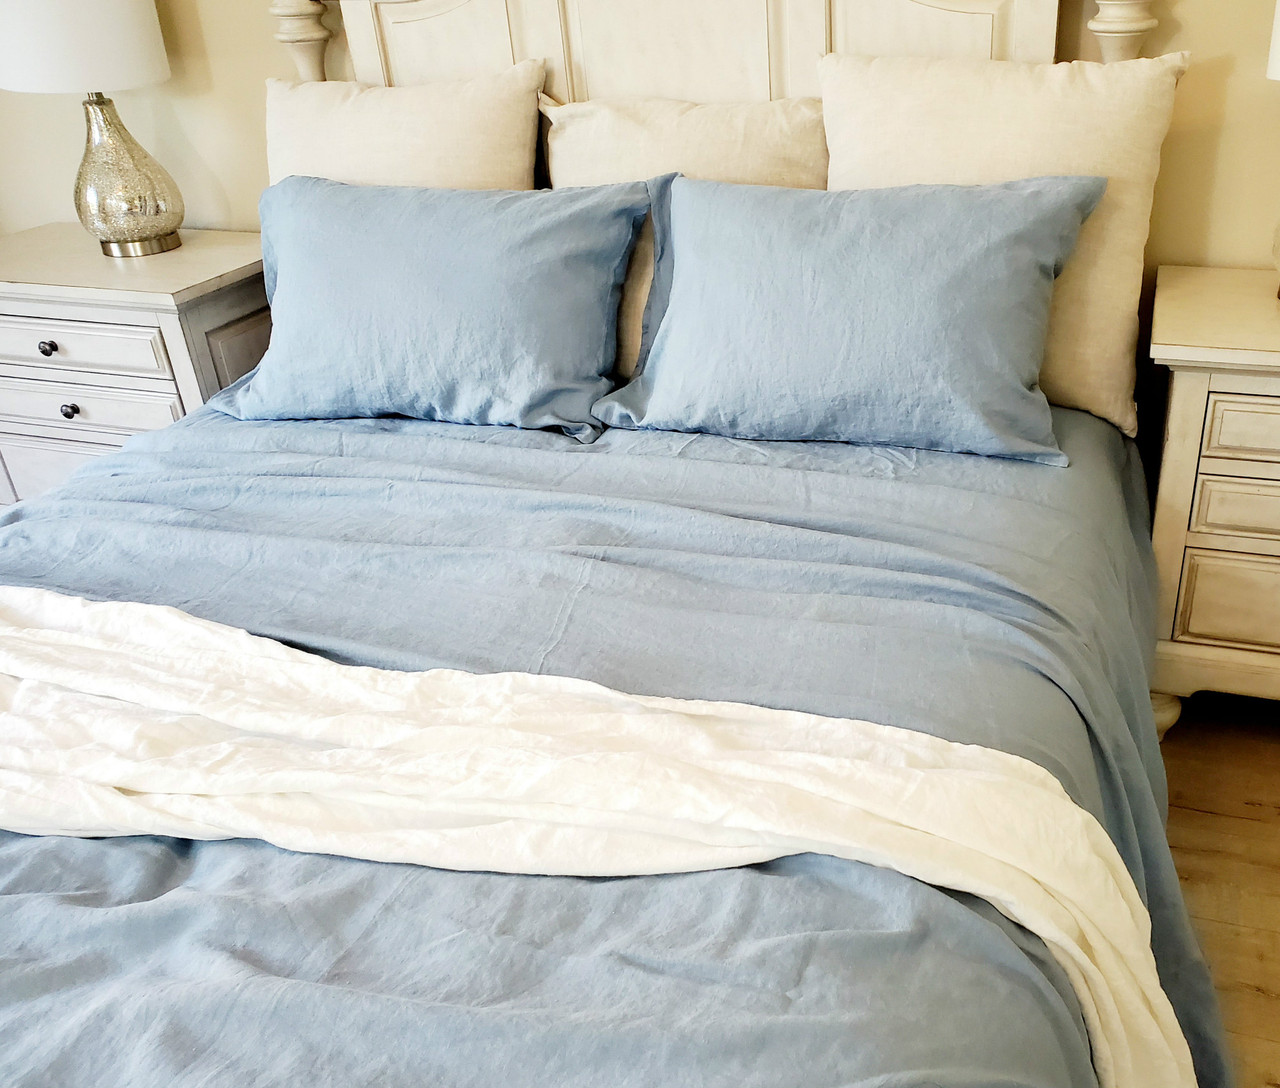 Dusty Blue Linen Duvet Cover Made To Fit